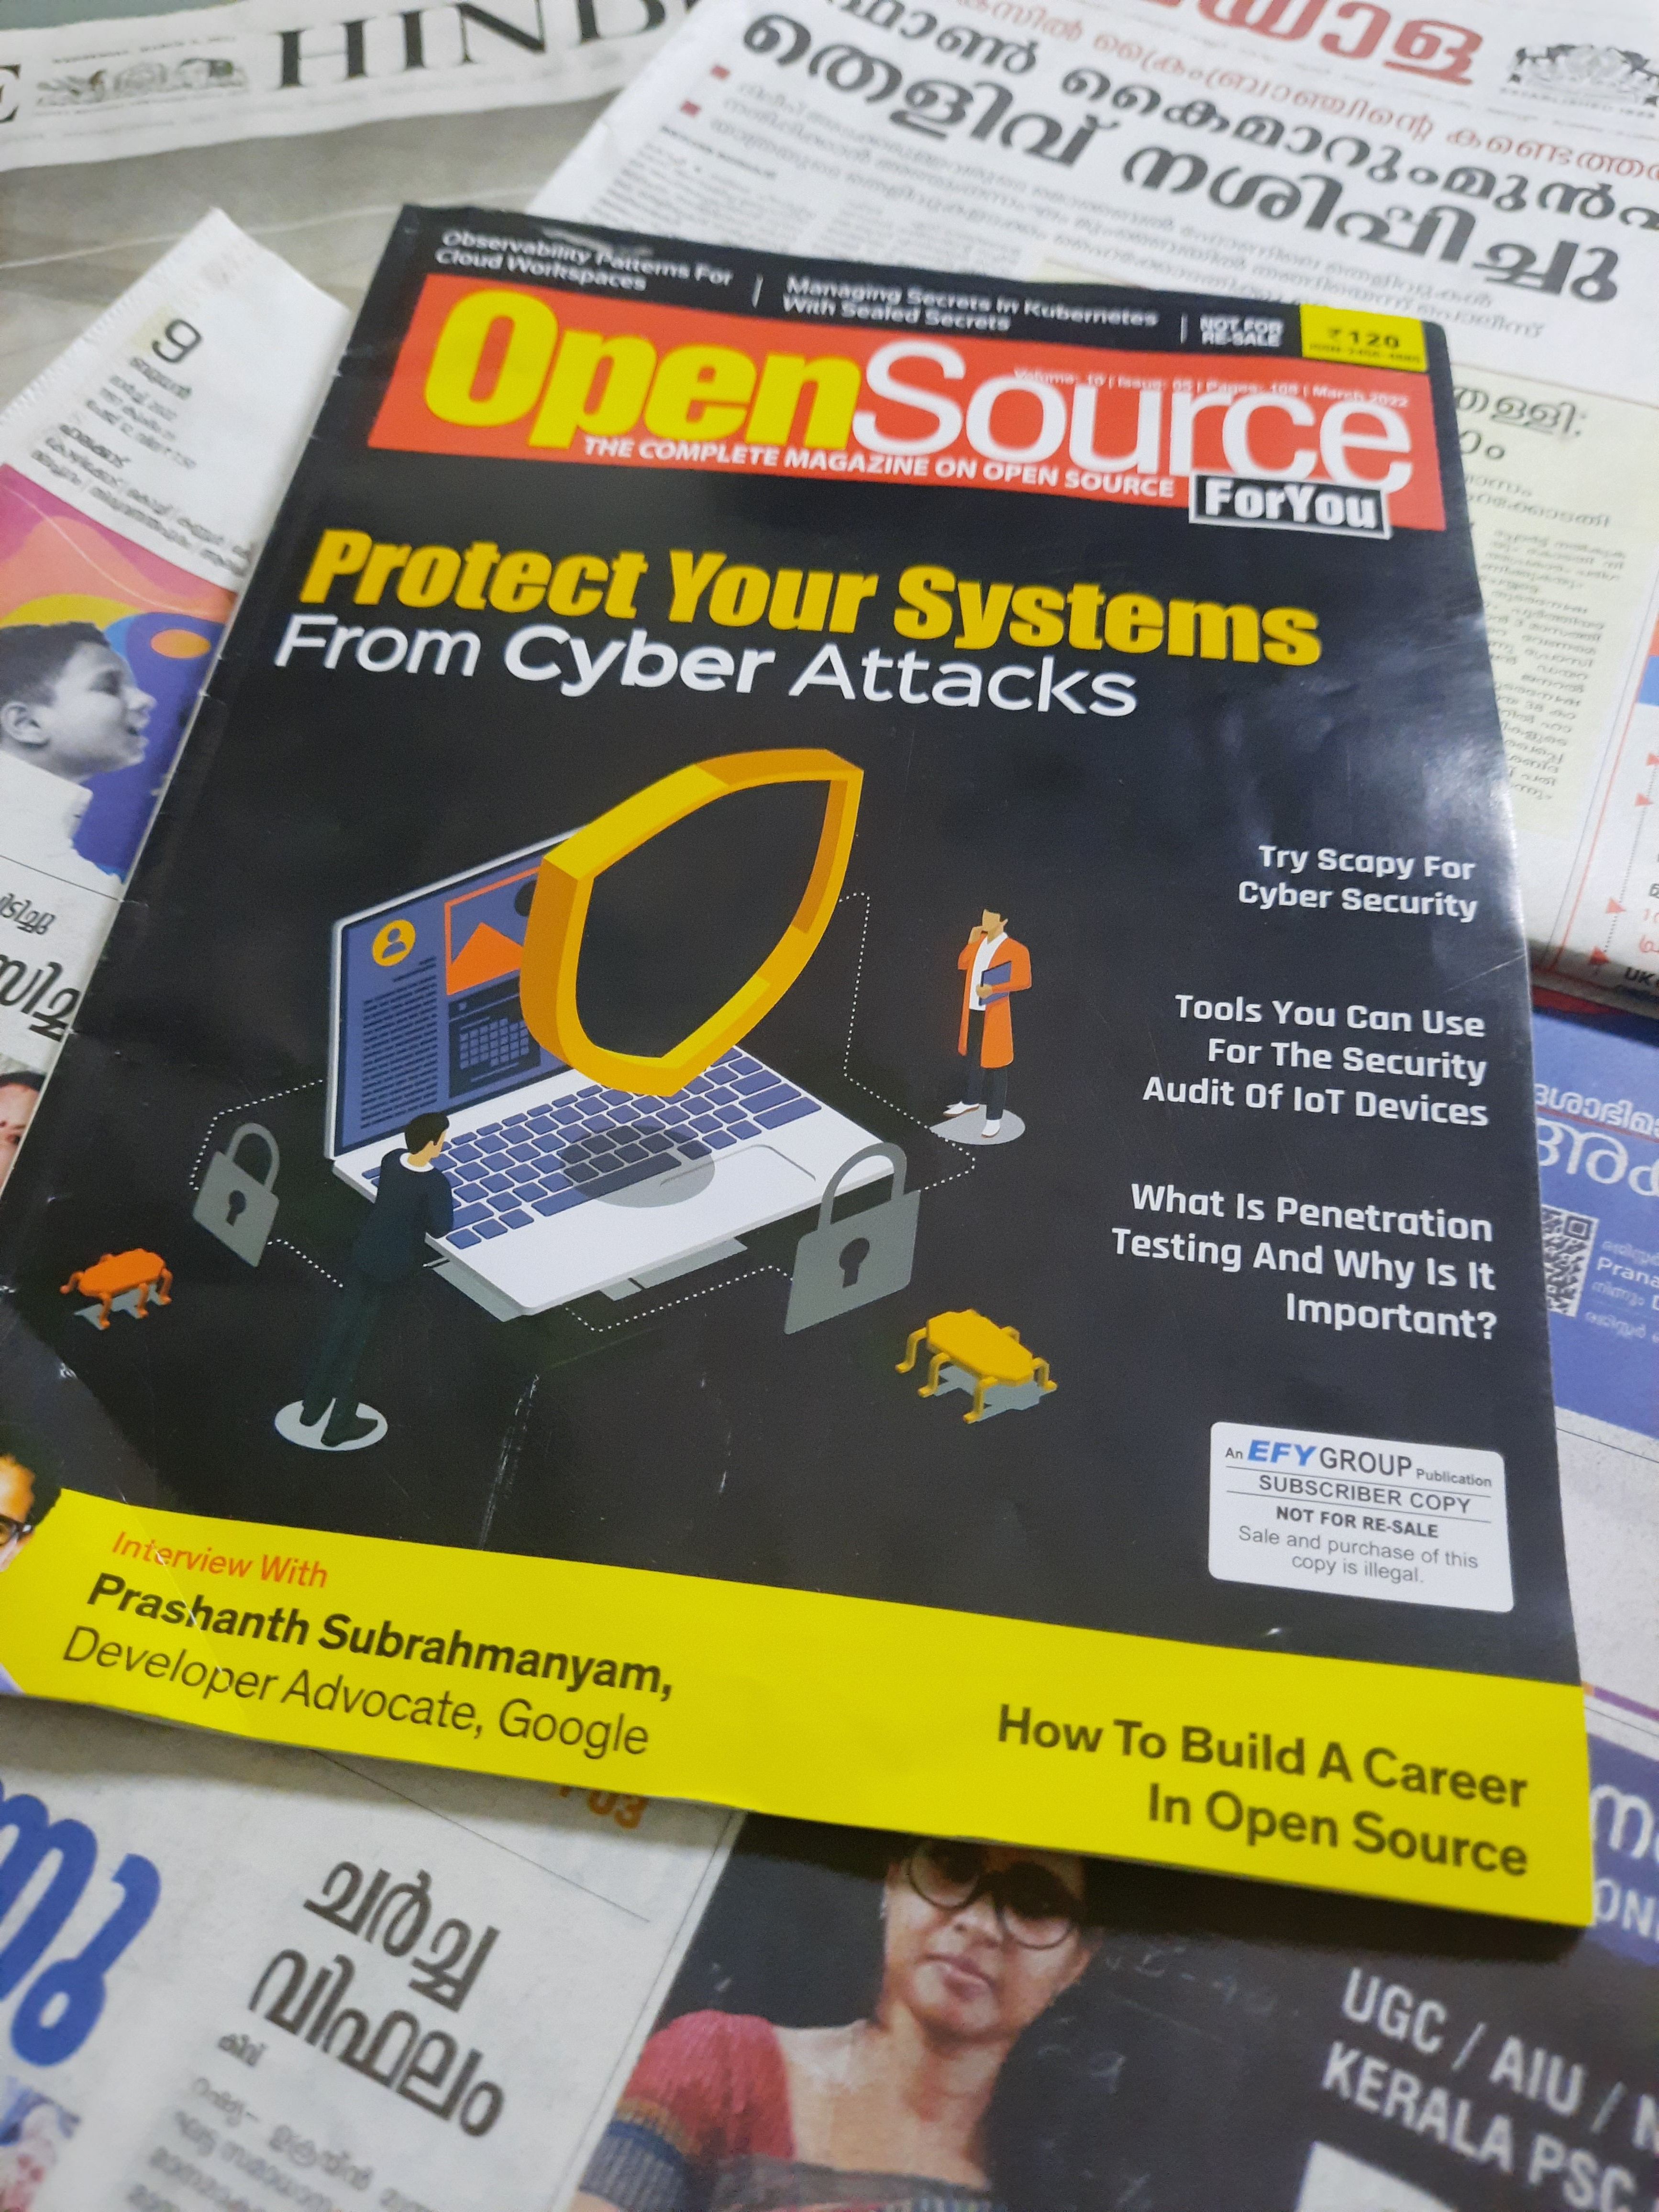 Open Source For You - Volume 10, Issue 5, March 2022